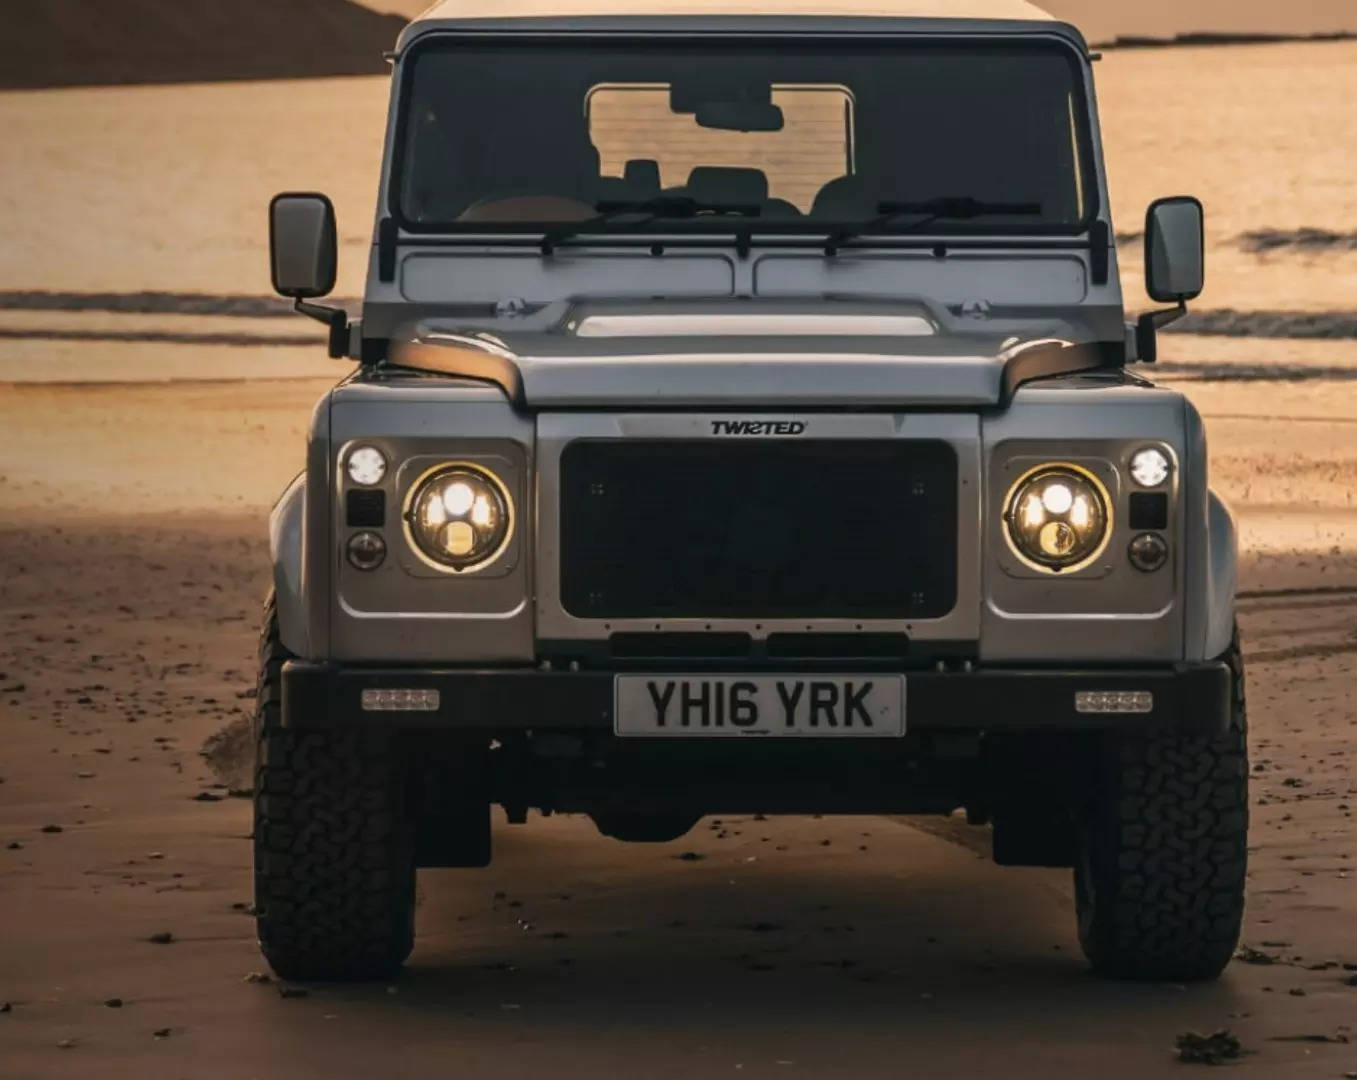 Twsited Automotive Land Rover Defender 110